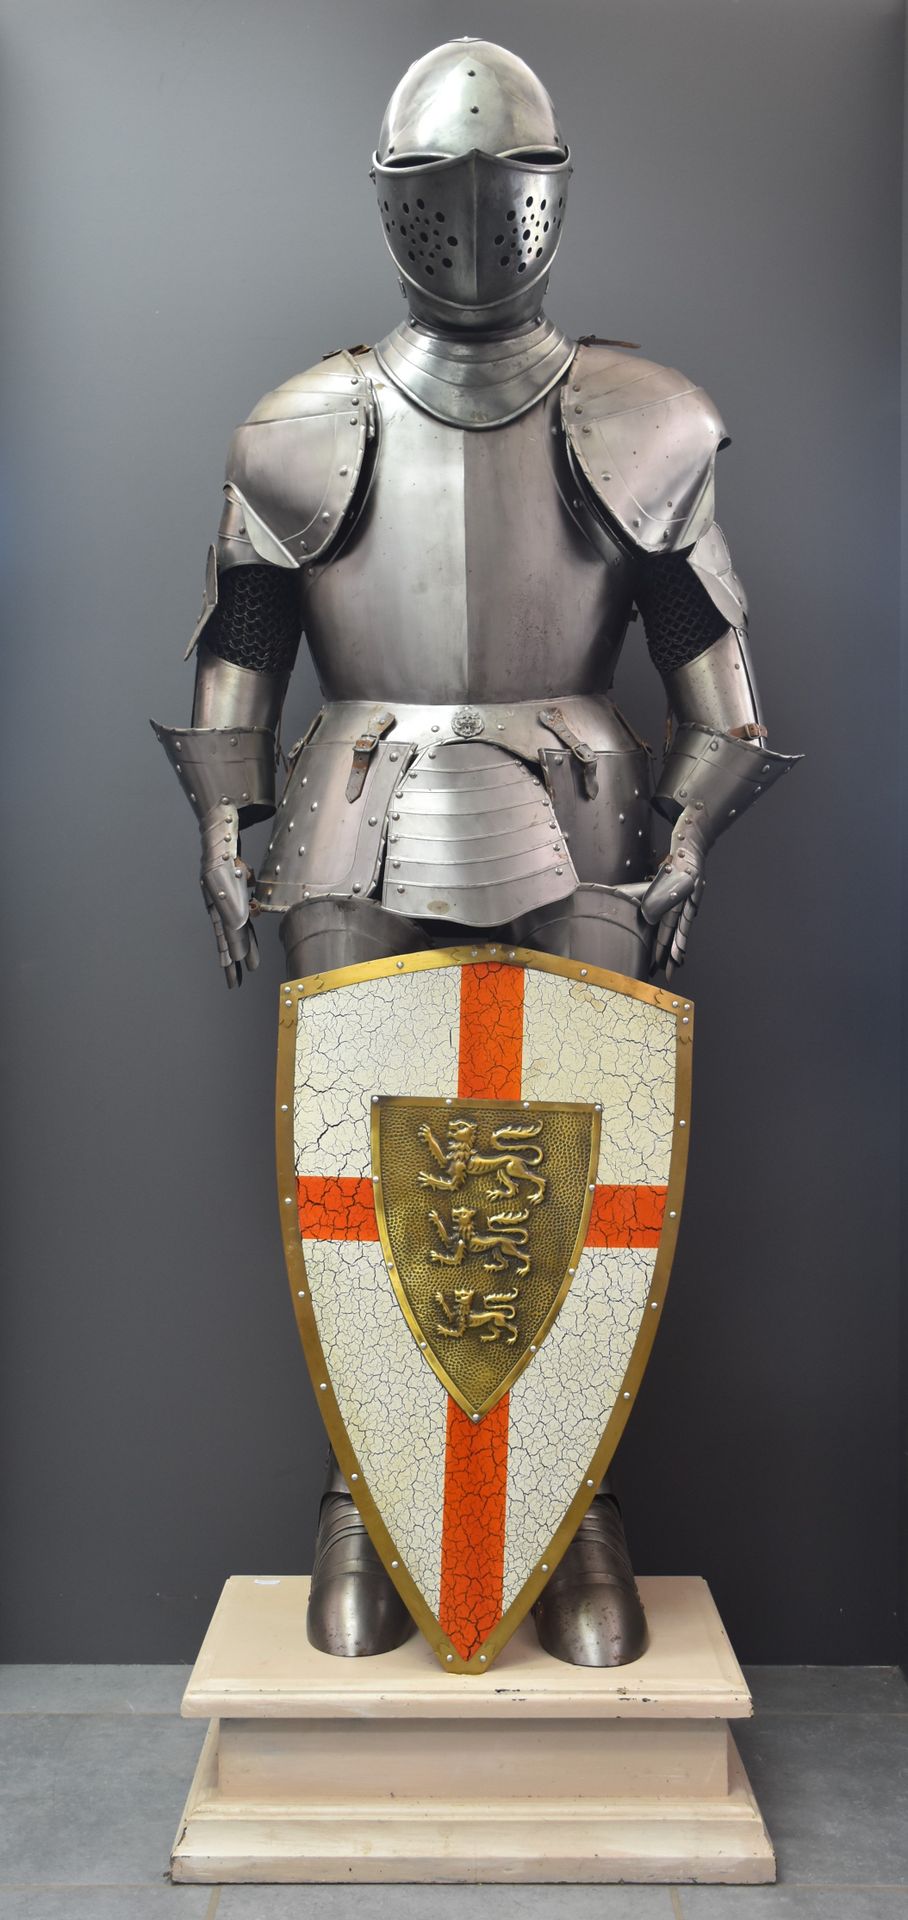 Null Medieval style armor, made in the middle of the 20th century.